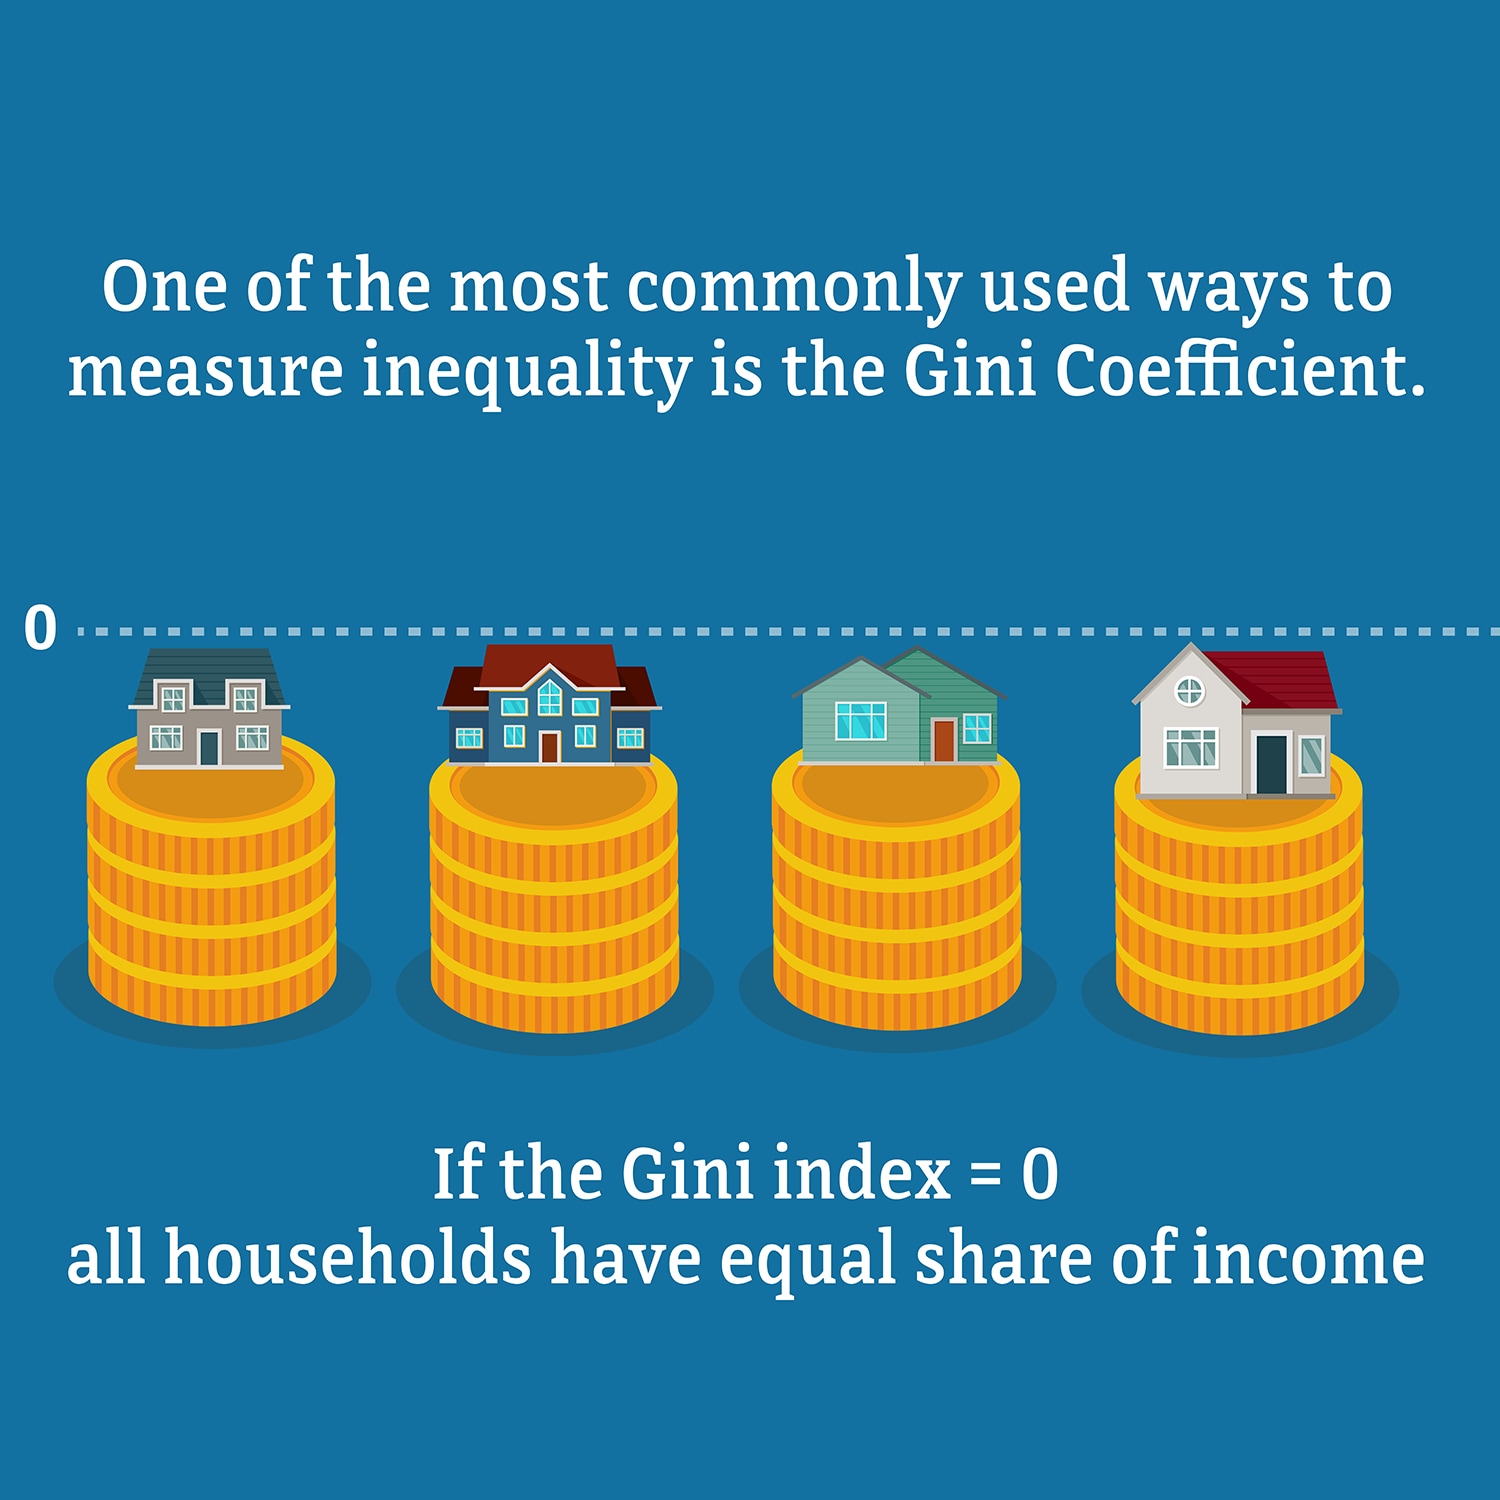 One of the most commonly used ways to measure inequality is the Gini Coefficient. If the Gini index = 0, all households have equal share of income.